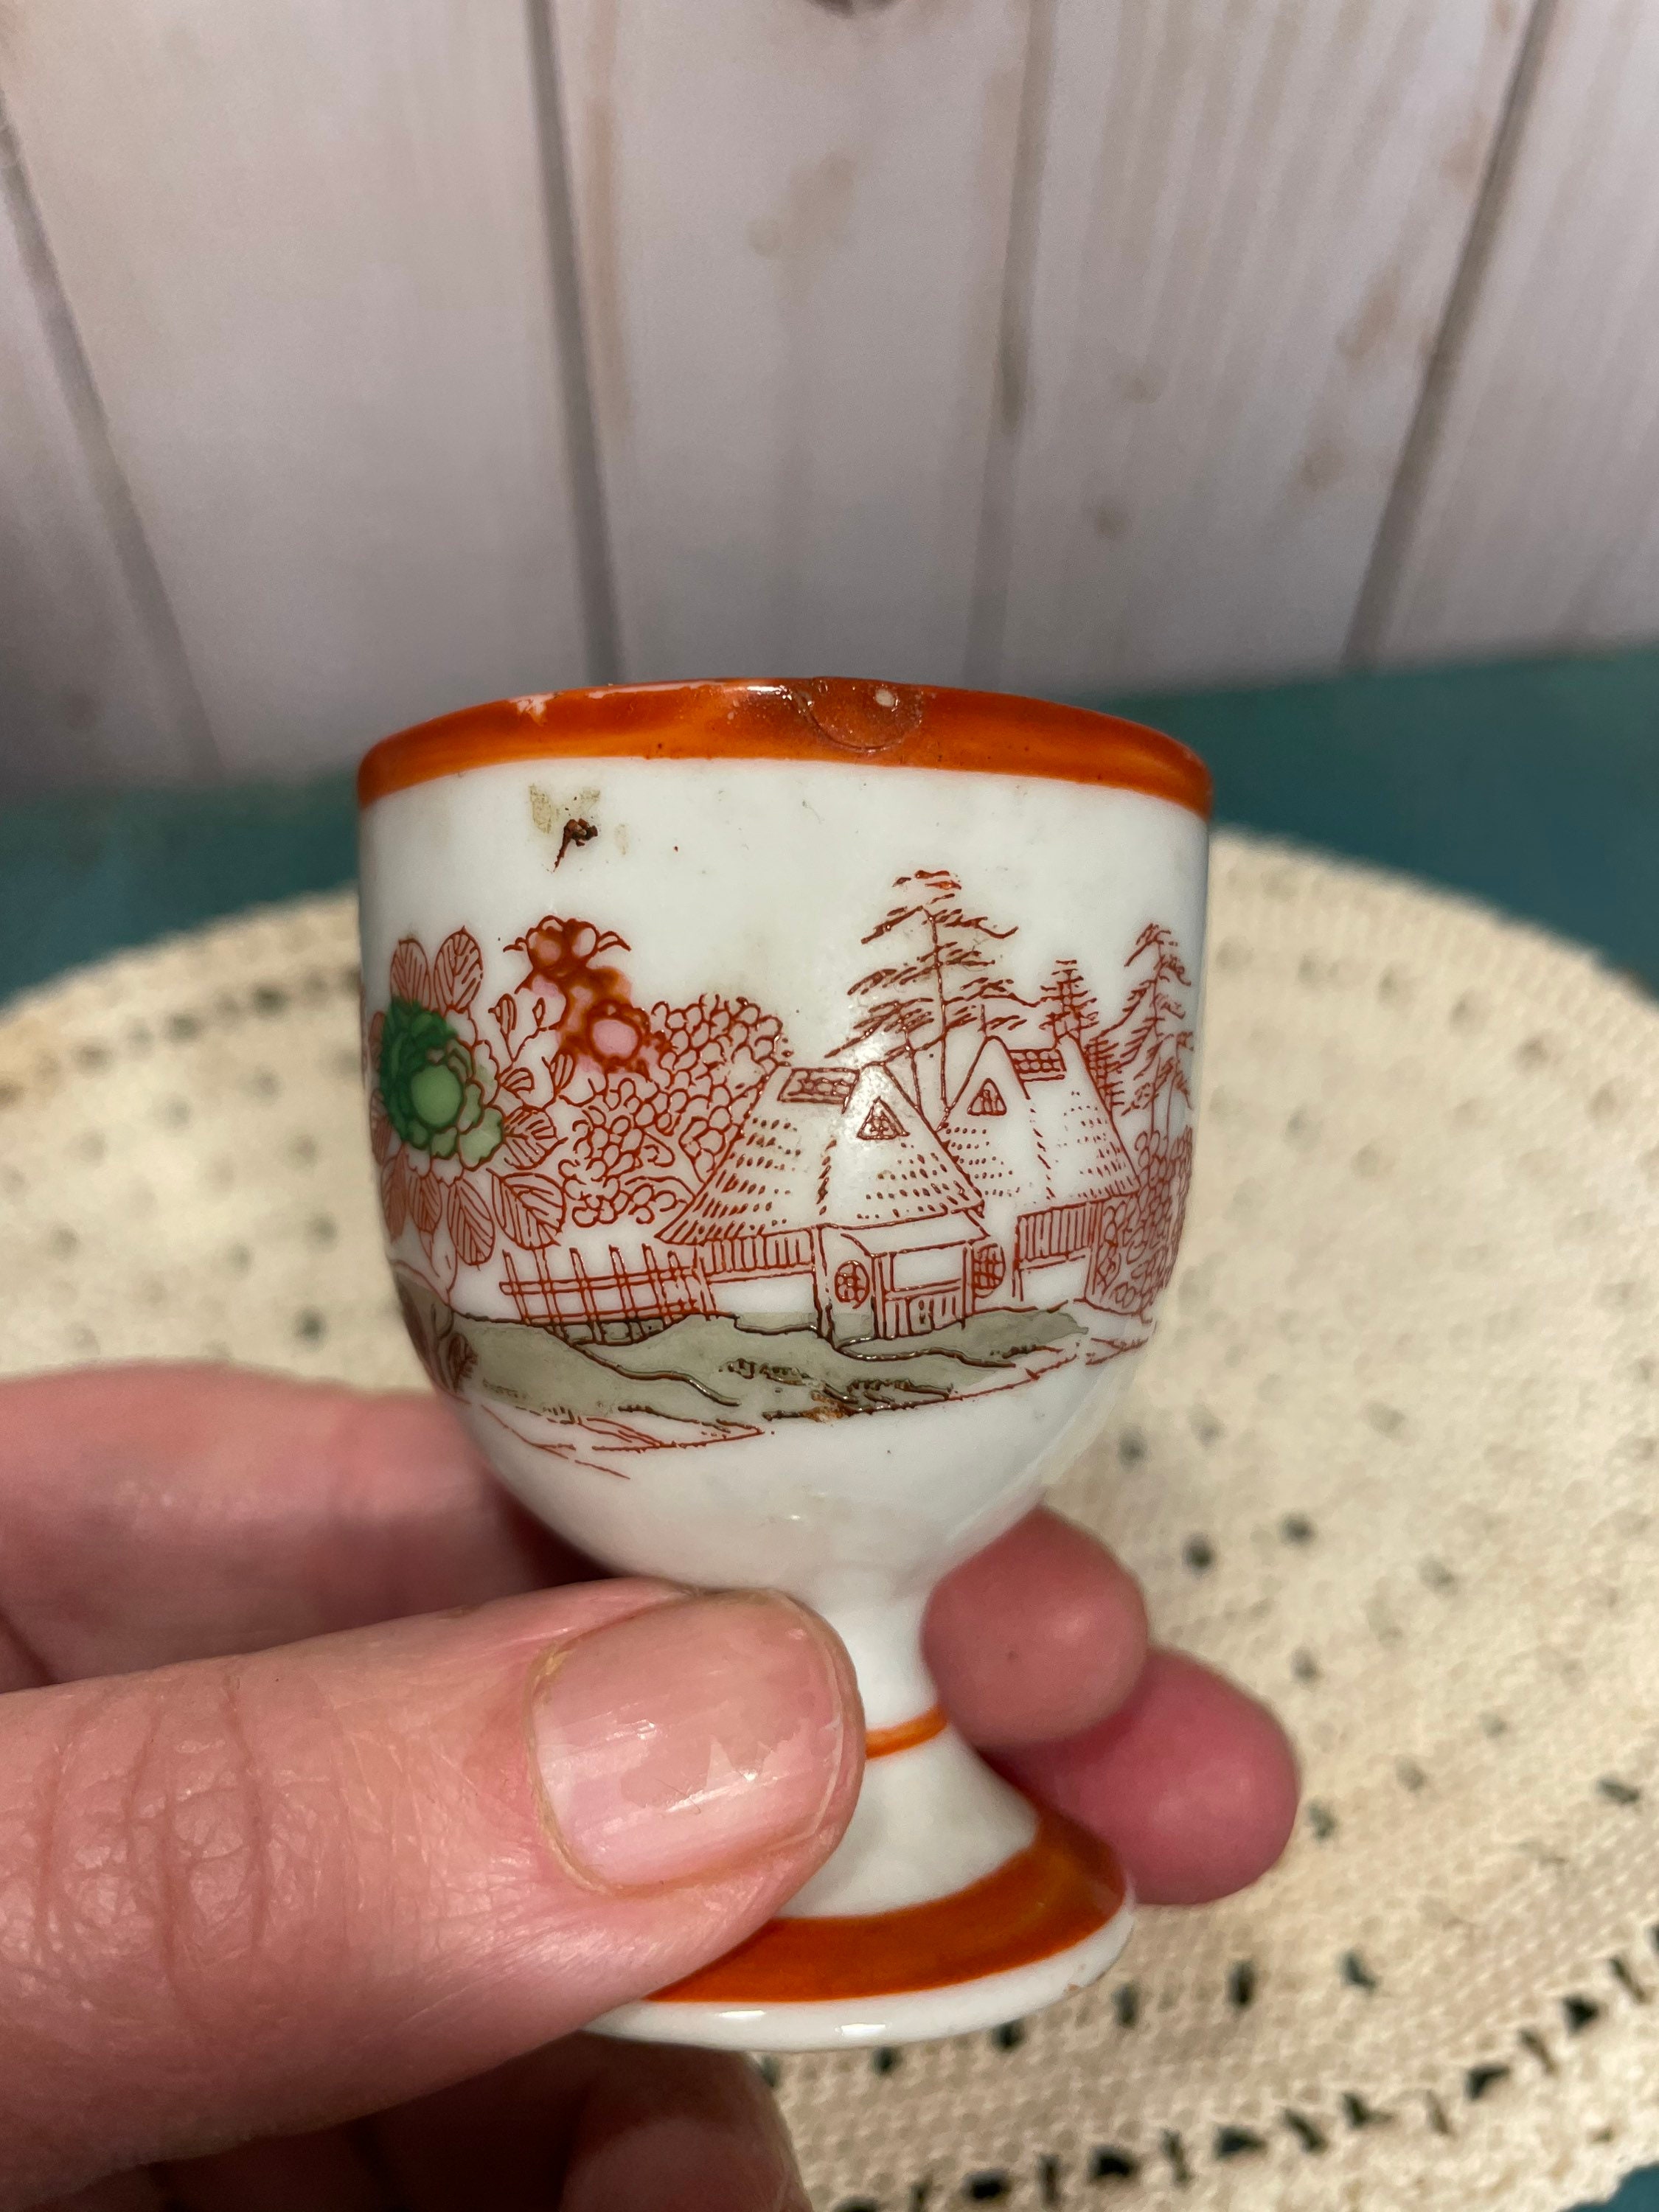 Single Vintage Egg Cup, Bucket Style, Red Transferware, Aesthetic Style  Floral, Made in England, Soft Boiled Eggs, Brunch 